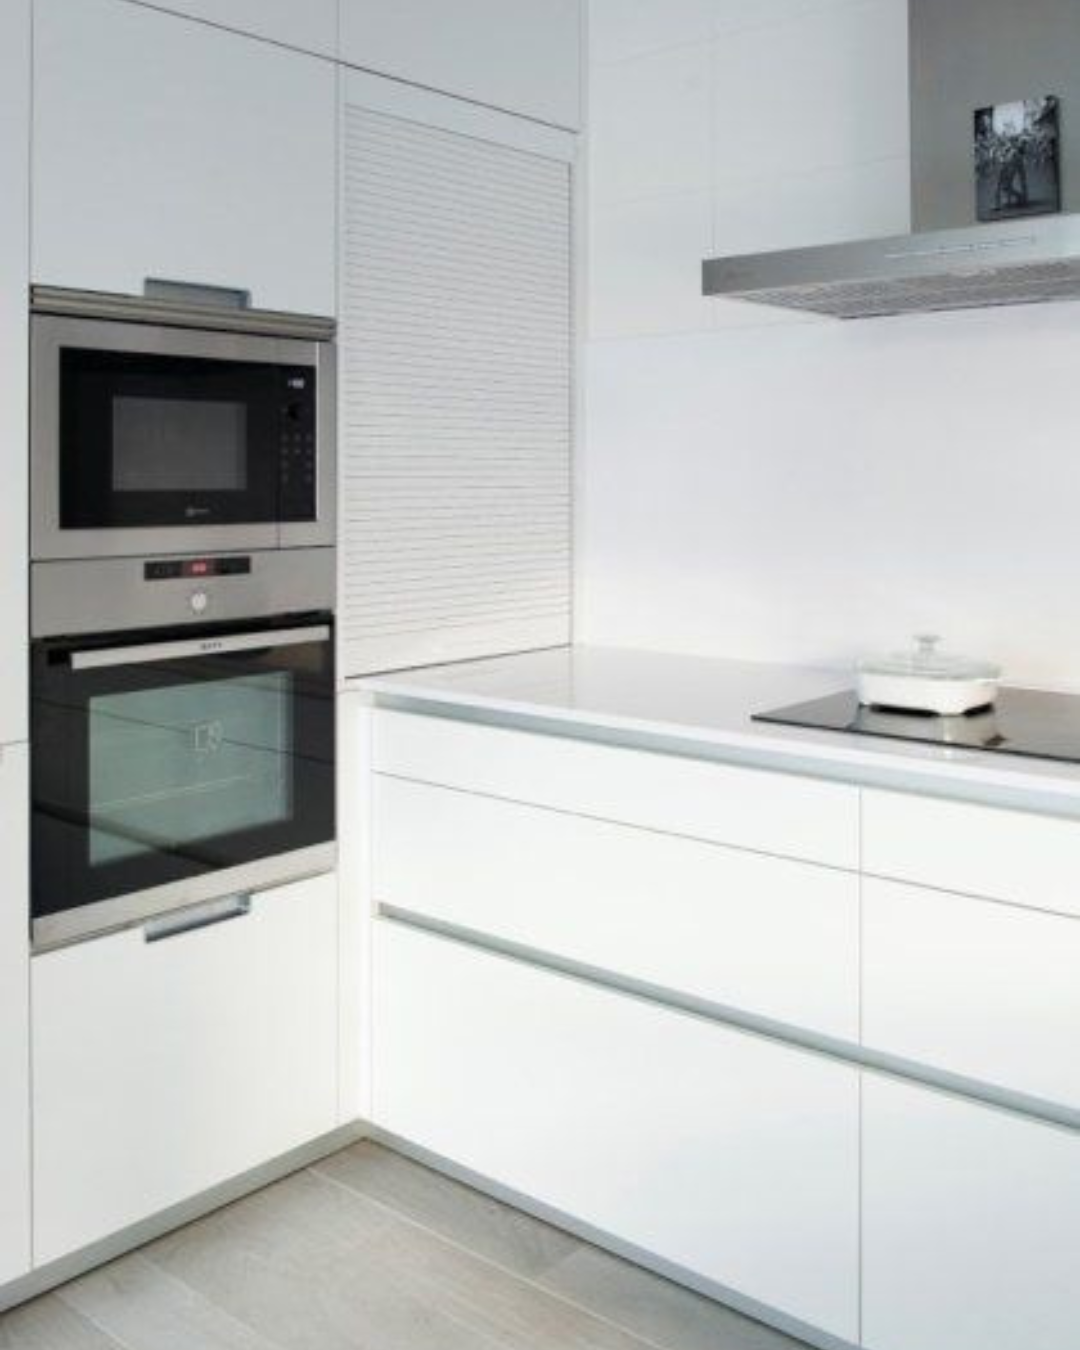 Top 10 Design Tips to Achieve The Perfect Small Modular Kitchen